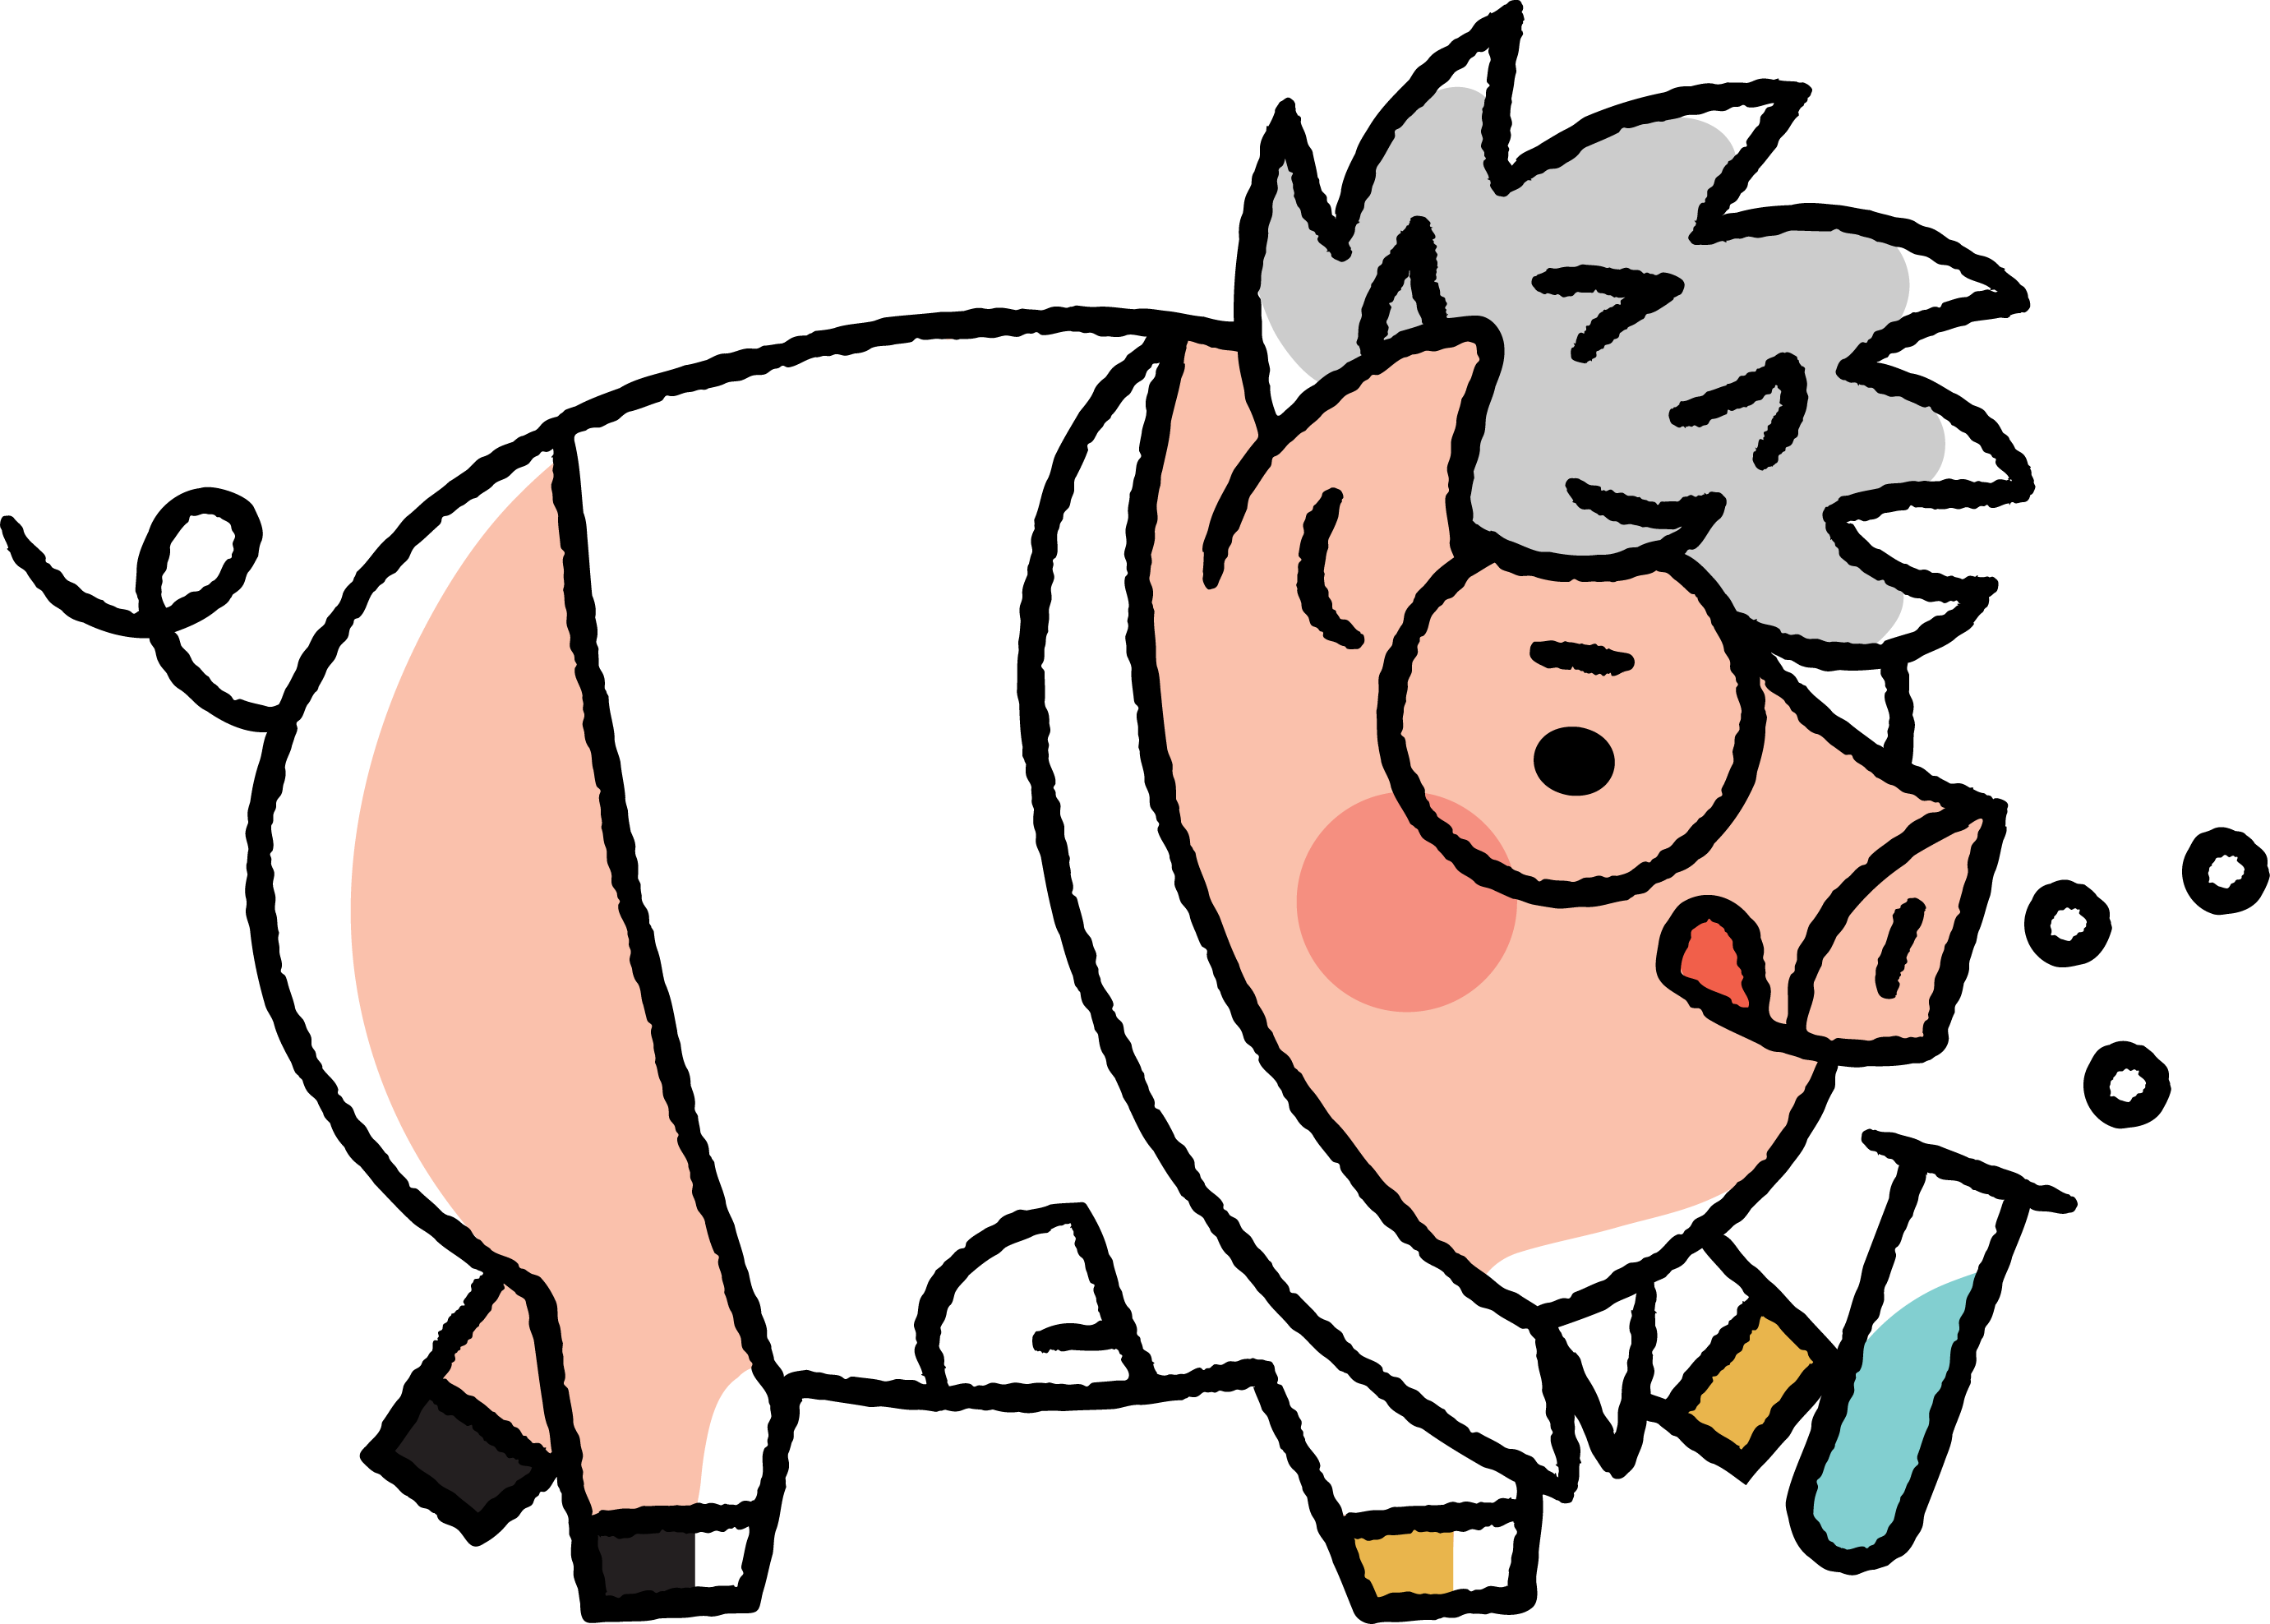 Penny the pig holding a bubbling test tube